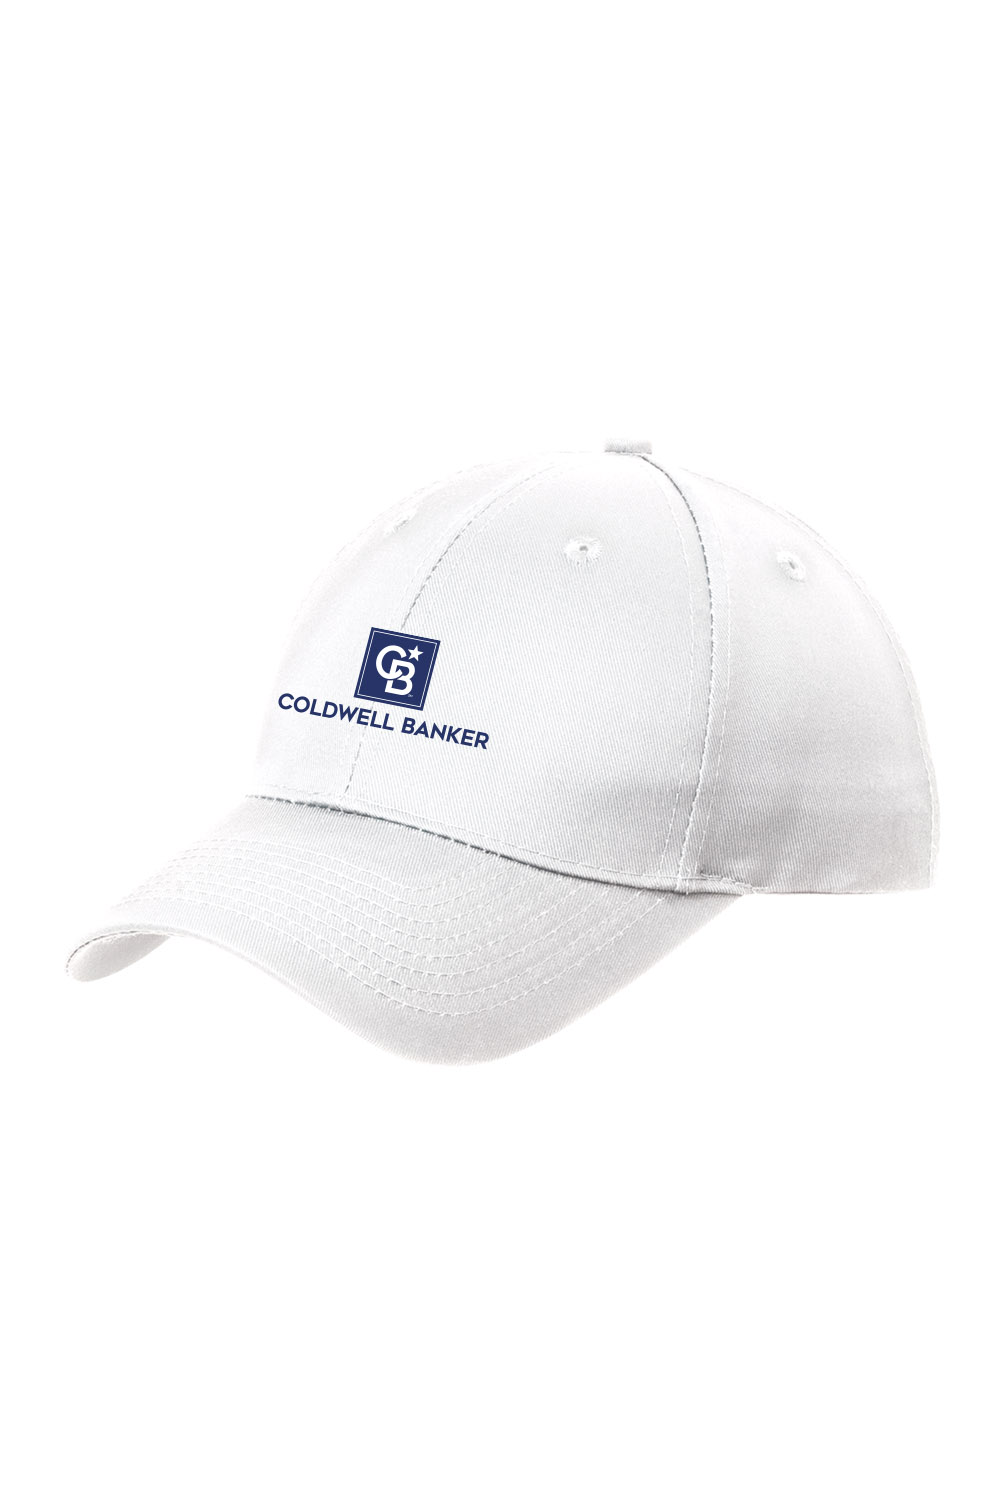 Port Authority® Easy Care Cap – Coldwell Banker OKI Promotional Products